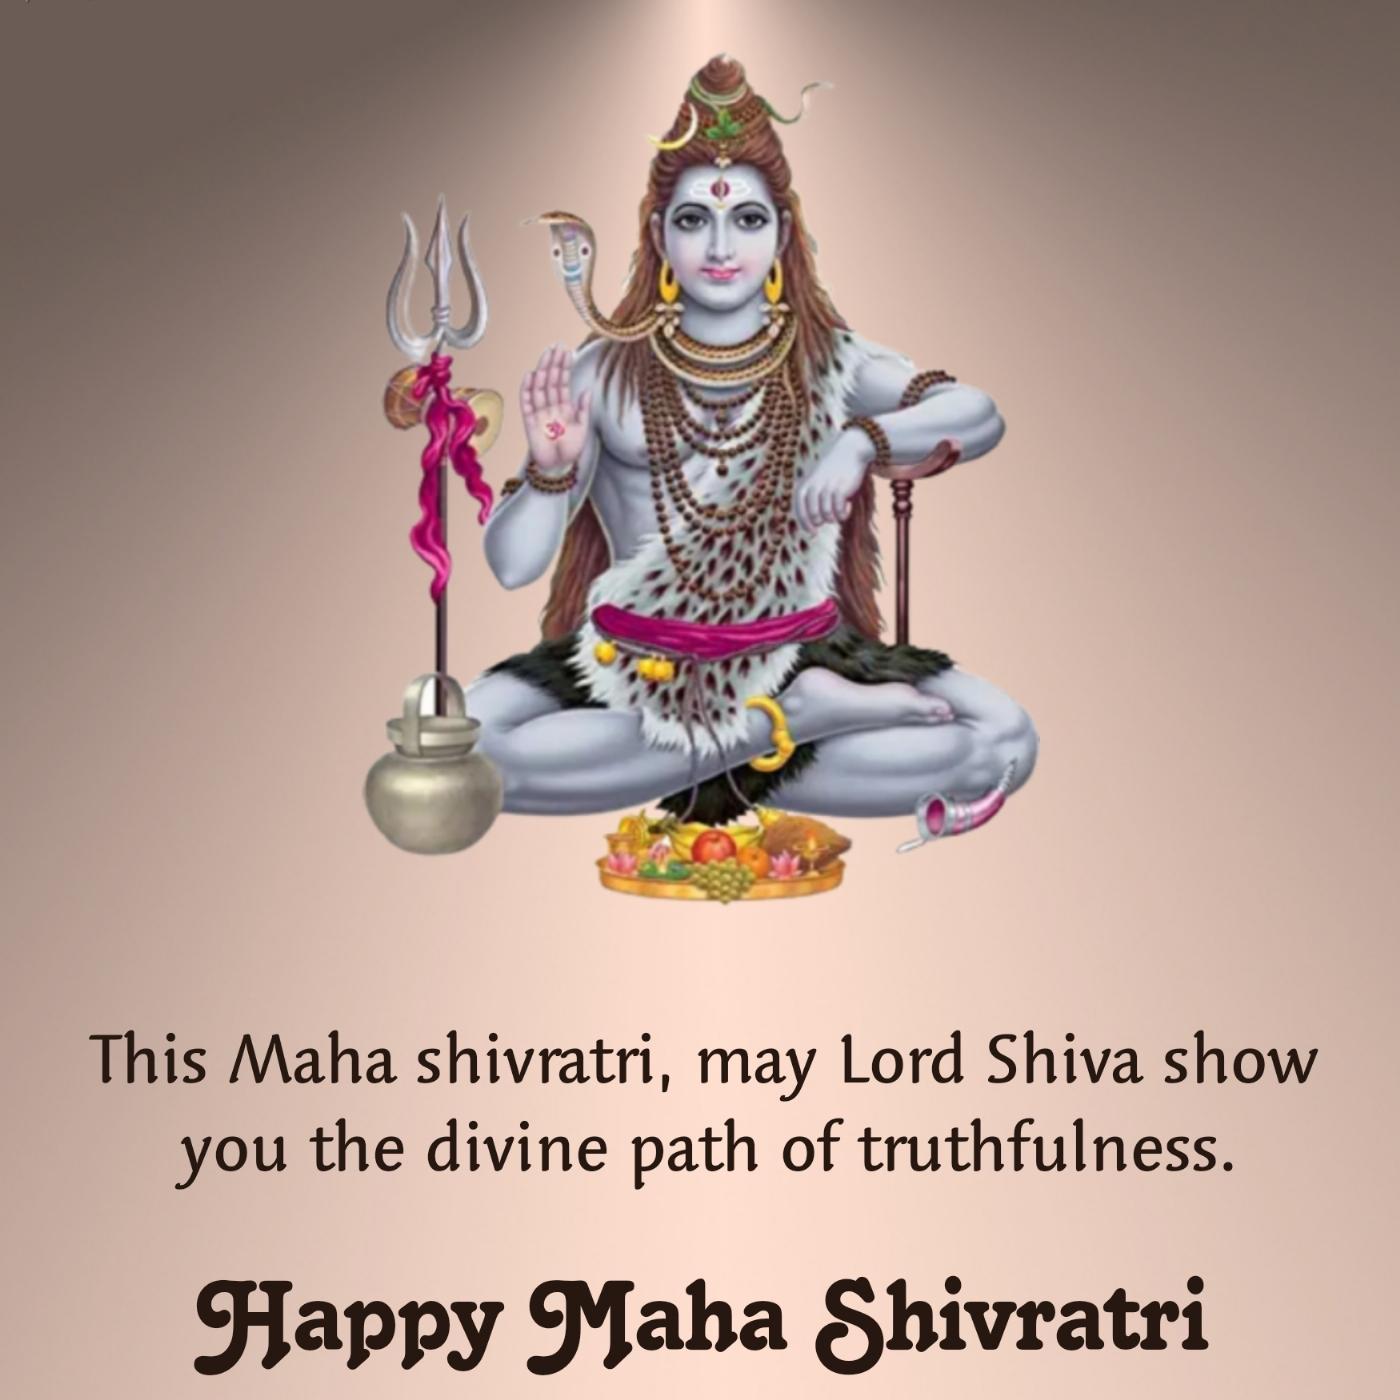 This Maha shivratri may Lord Shiva show you the divine path of truthfulness